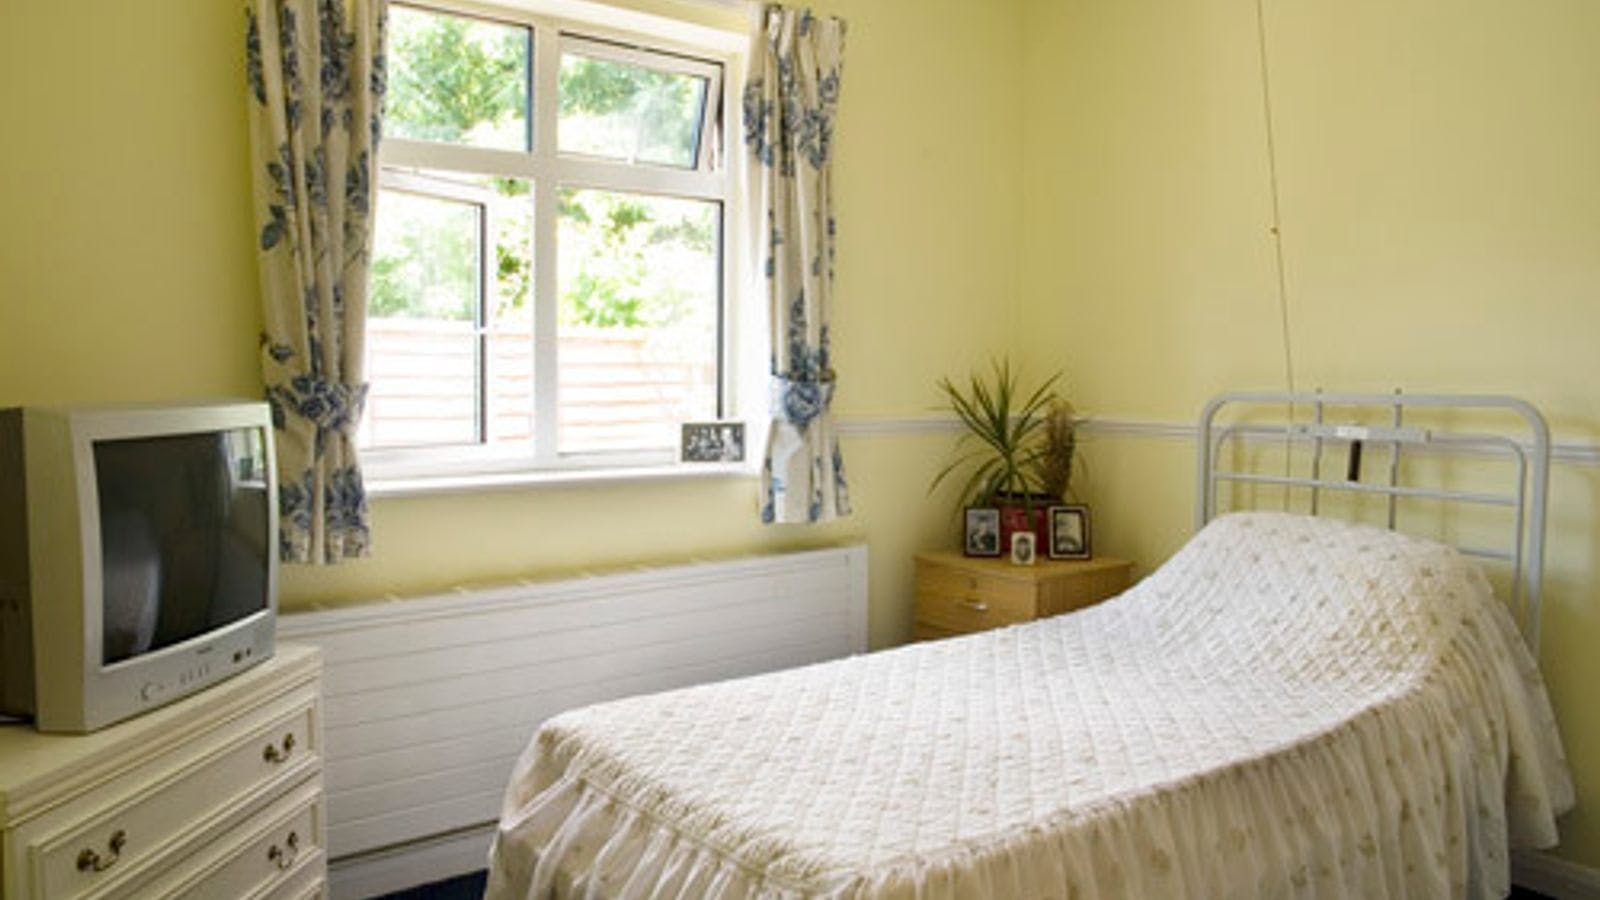 Bedroom at Latham Lodge Care Home in Portsmouth, Hampshire